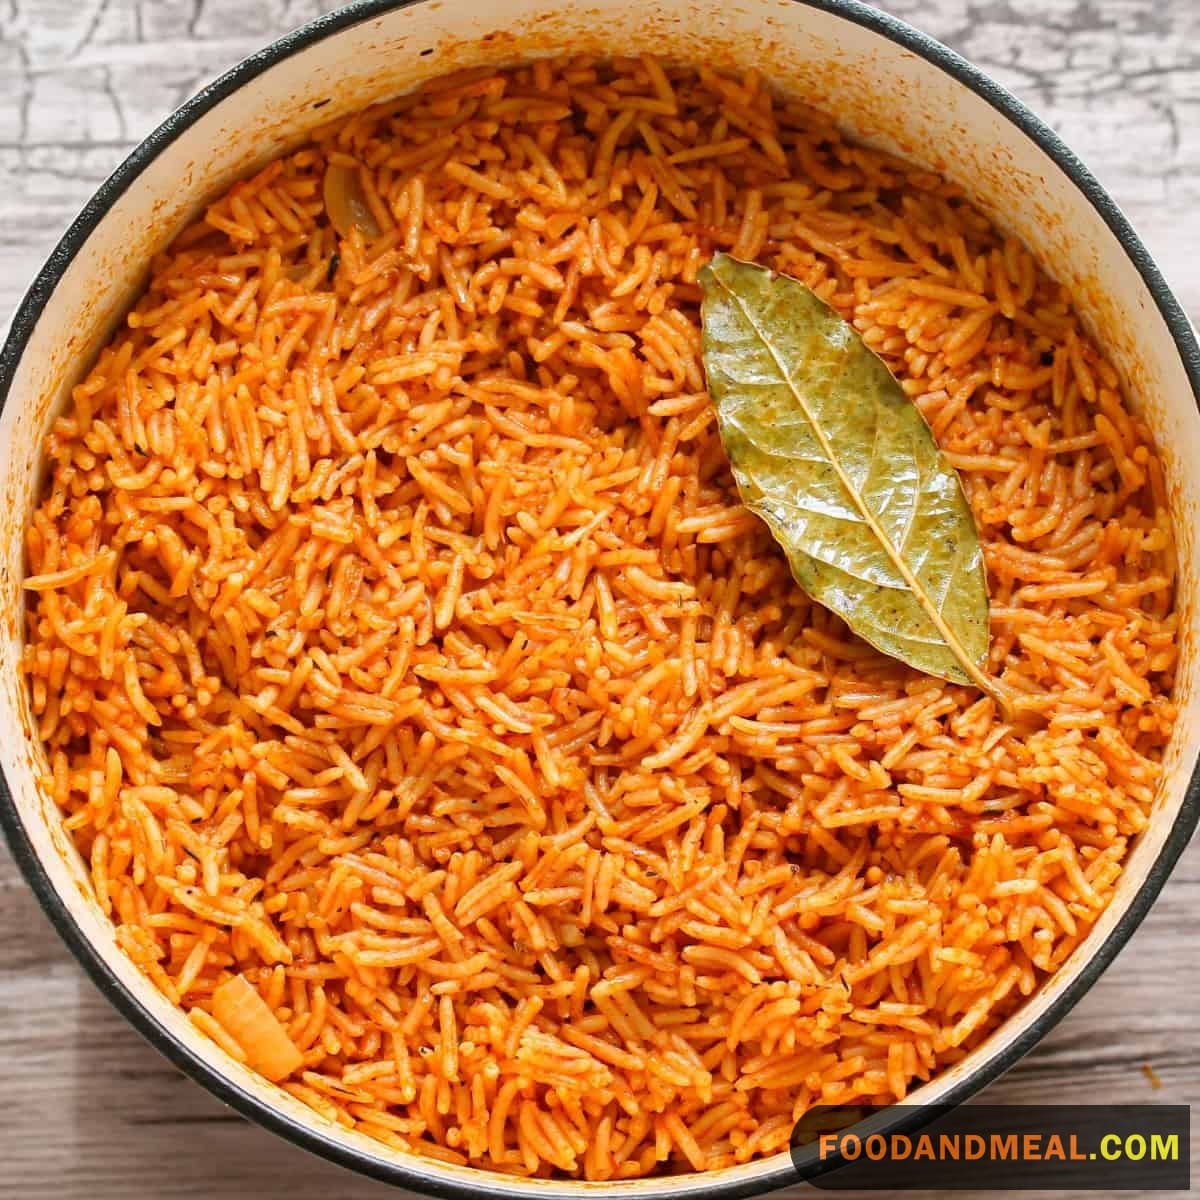 The Art Of Crafting Jollof: A Dance Of Spices And Tomatoes.